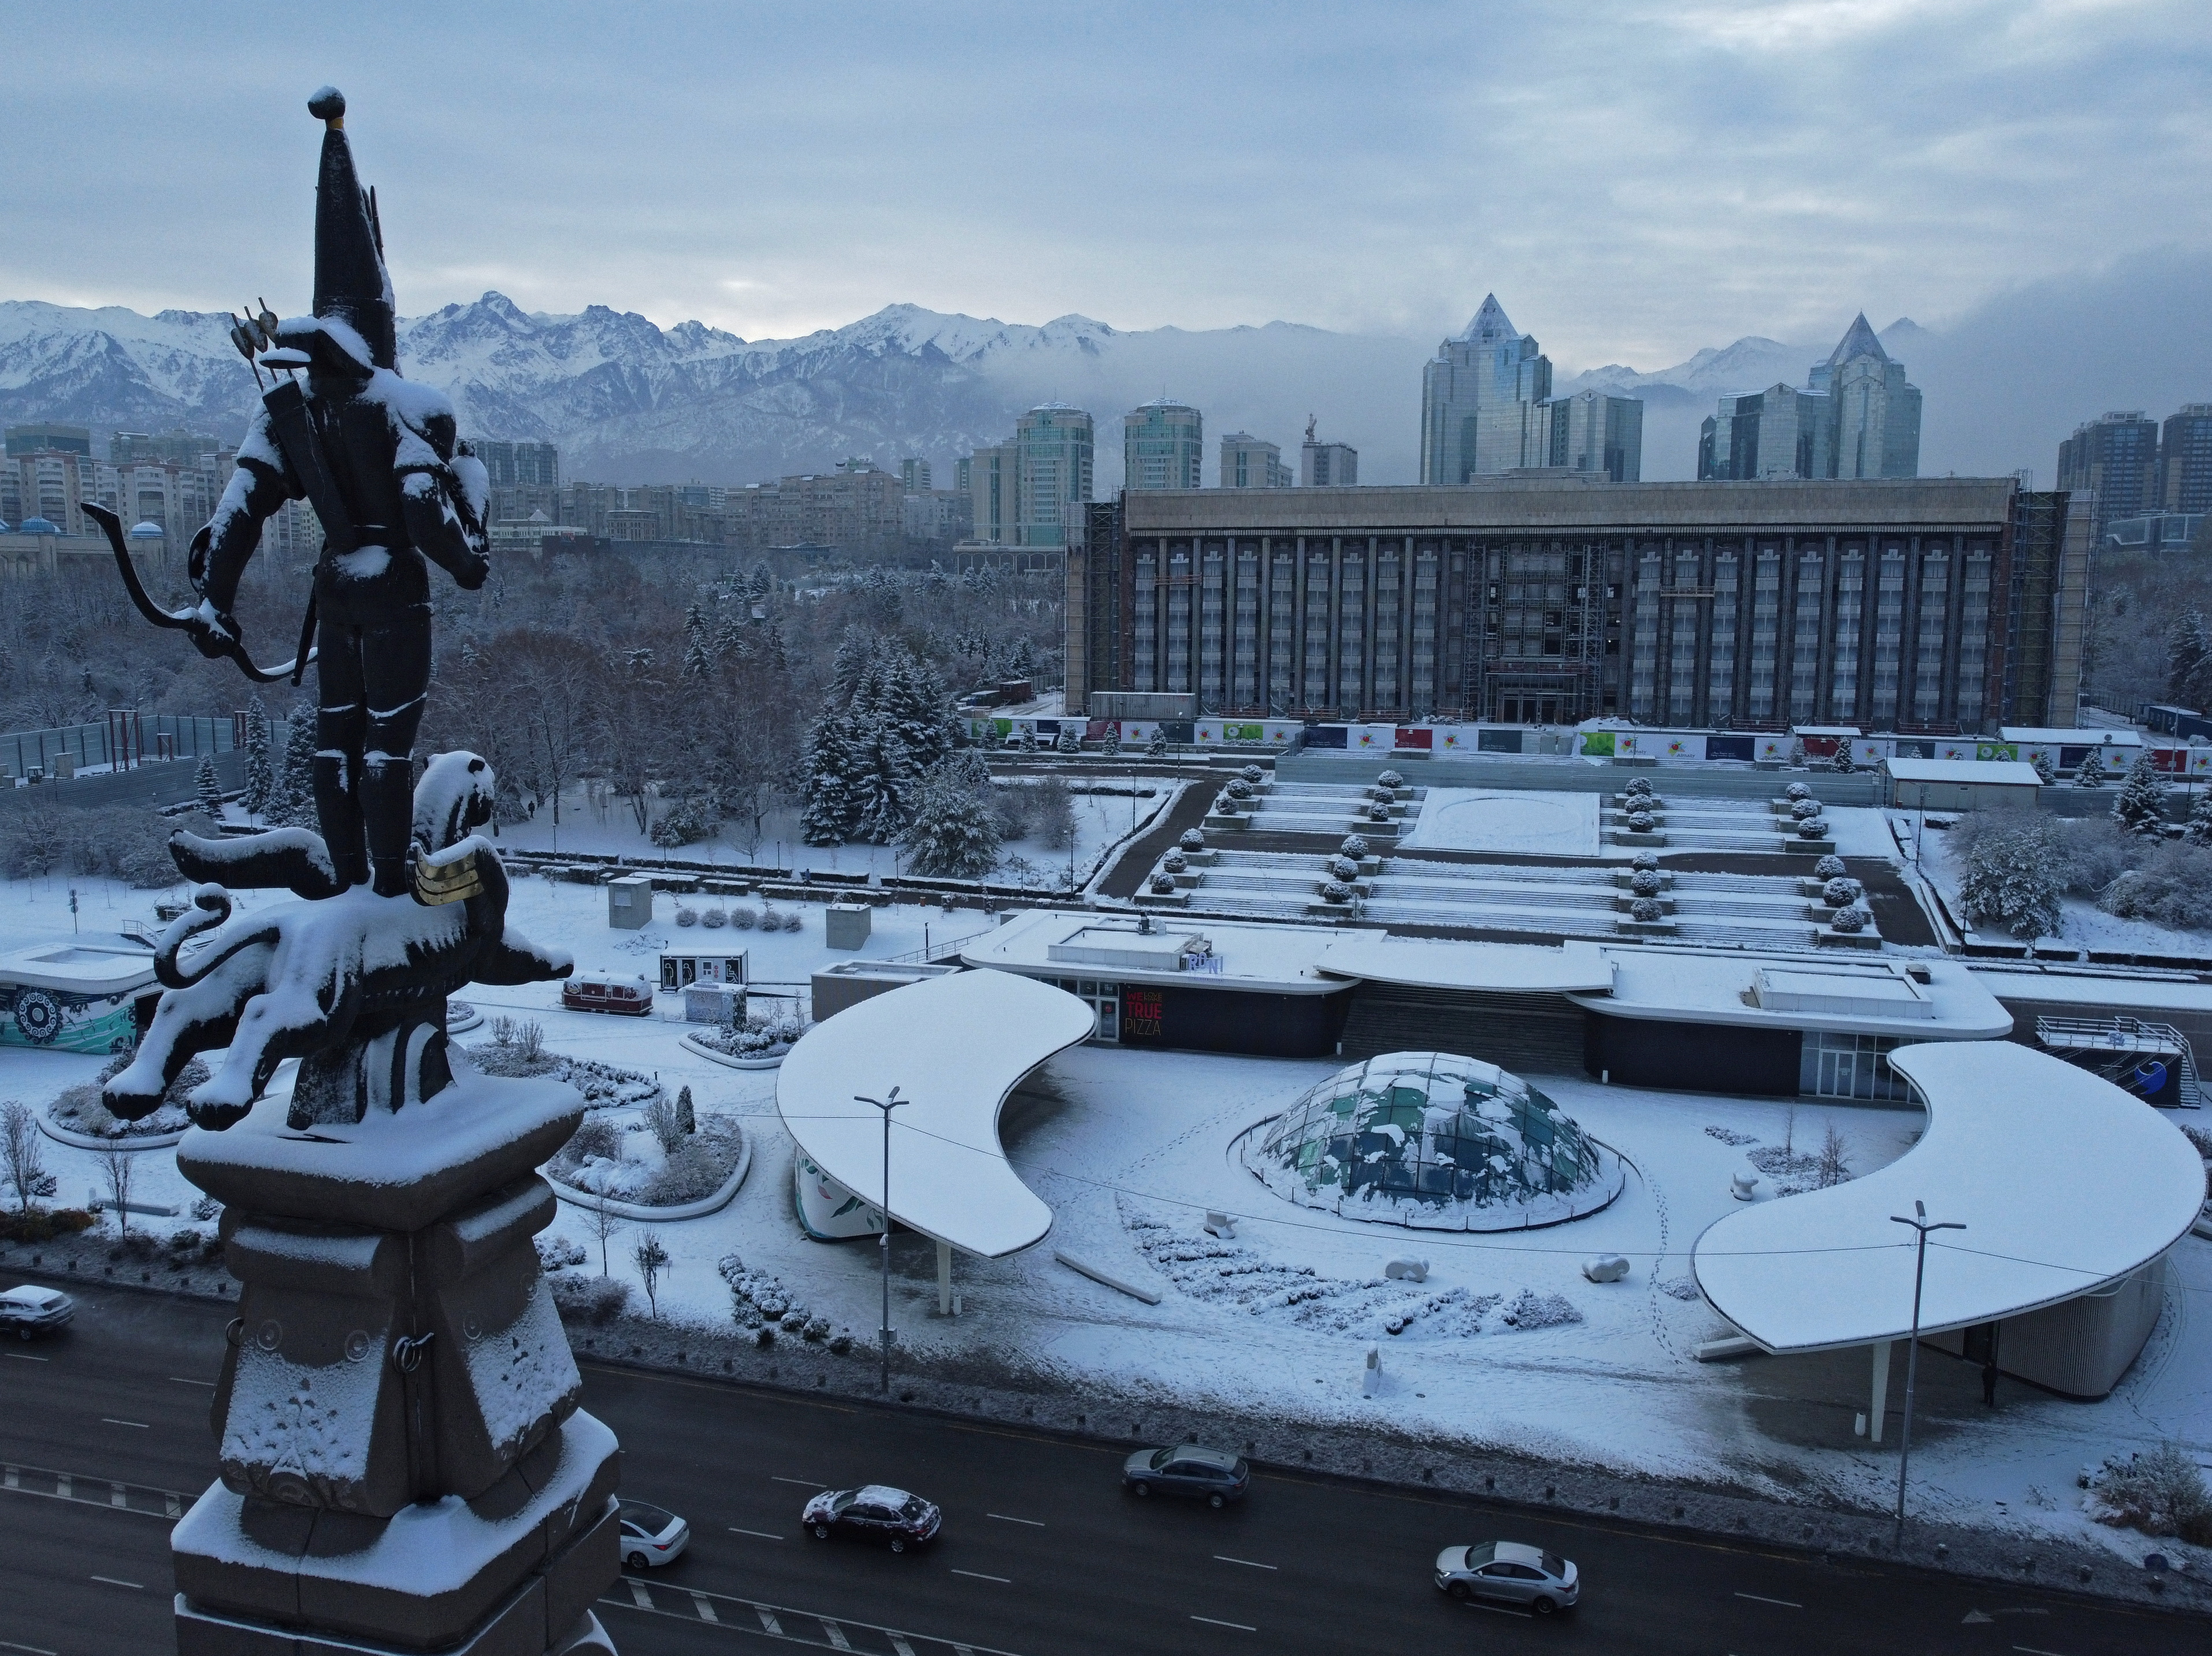 A view shows the Monument of Independence in front of the city administration headquarters in Almaty